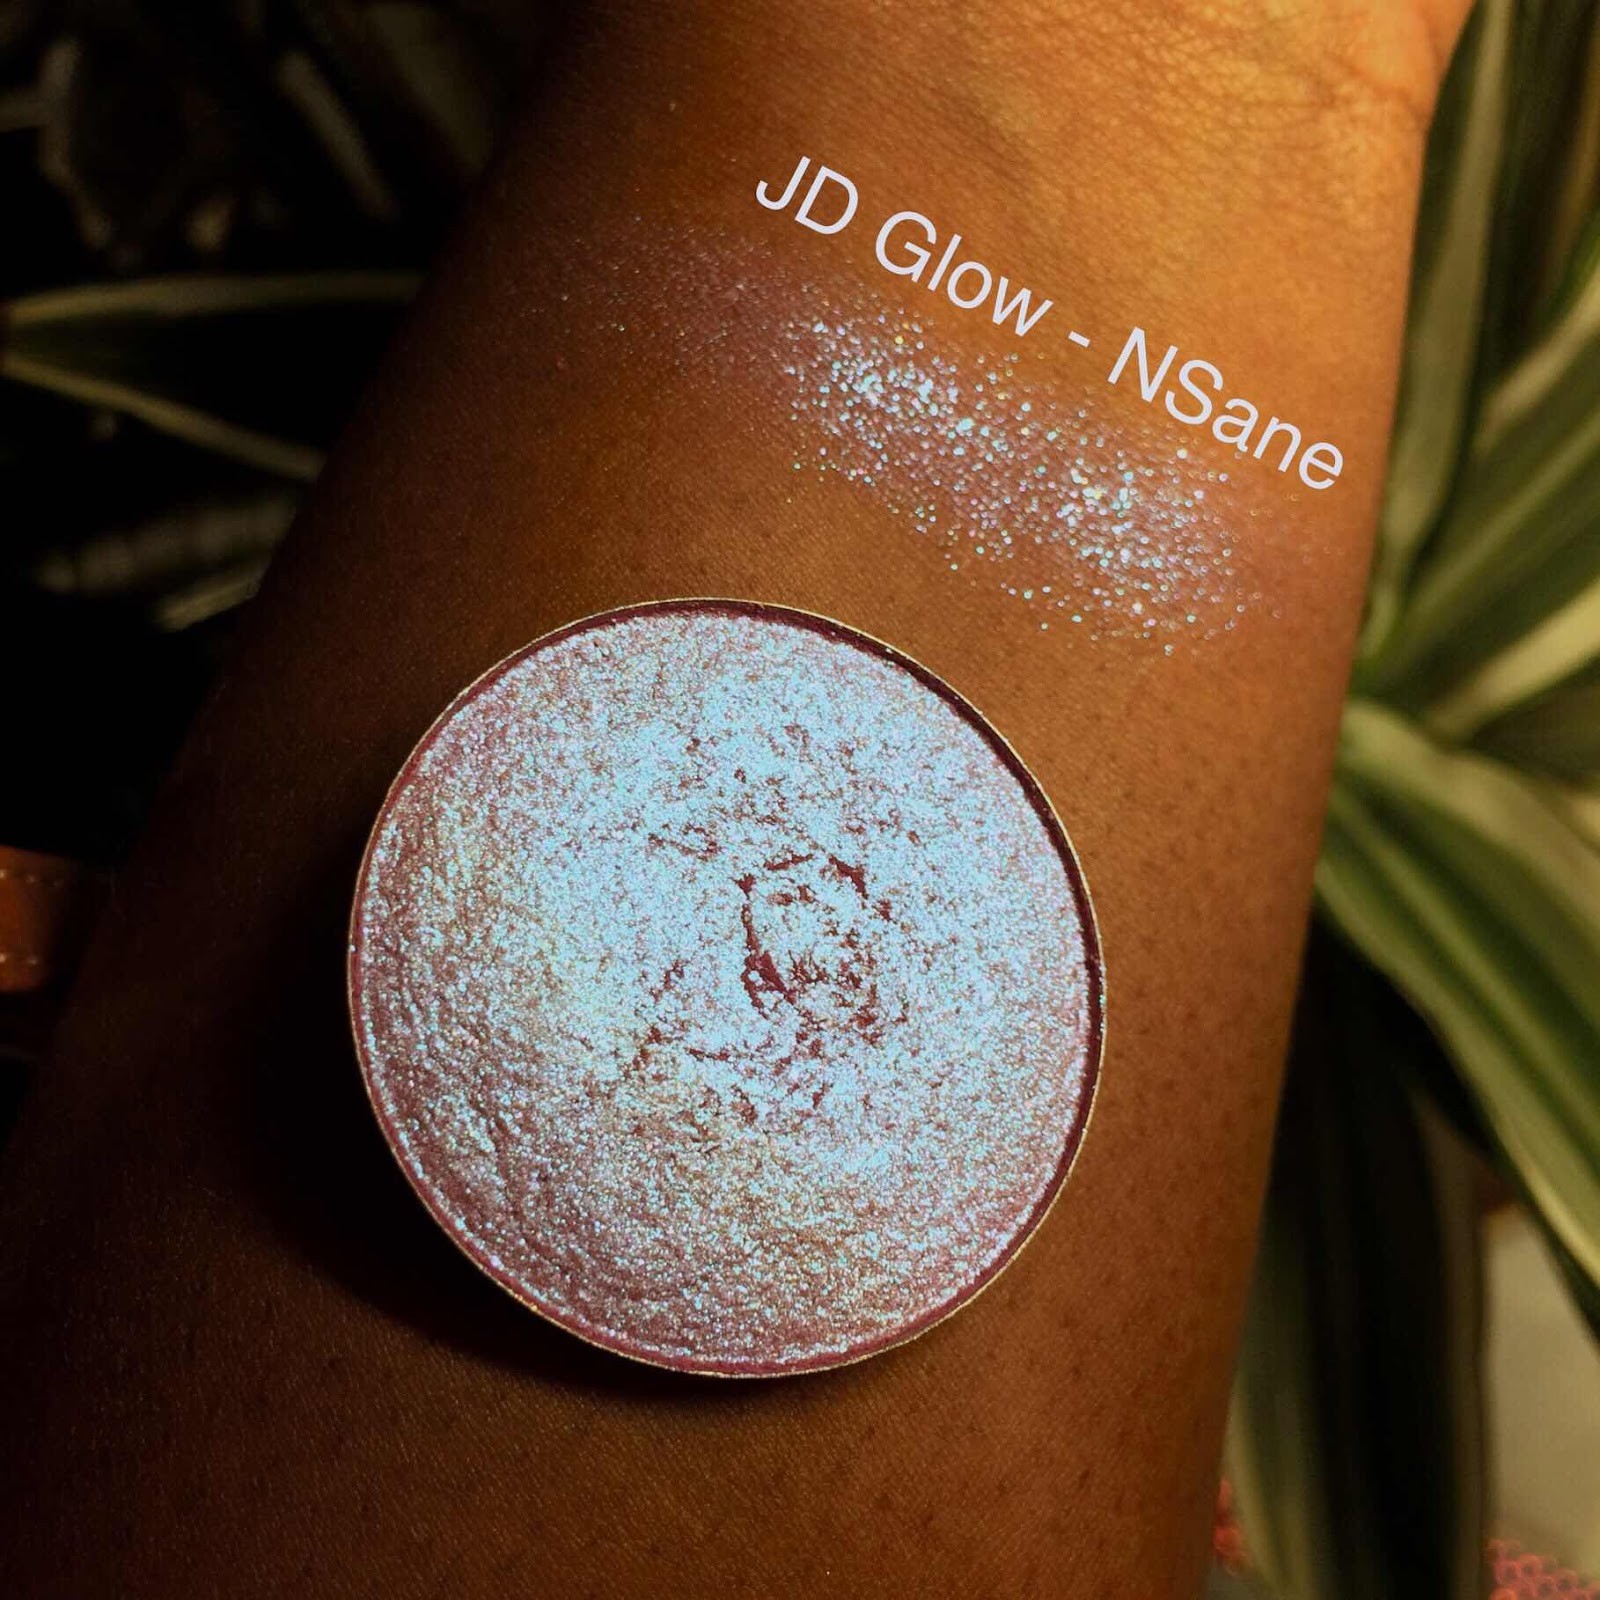 JDGlow NSane arm swatch with silver shift